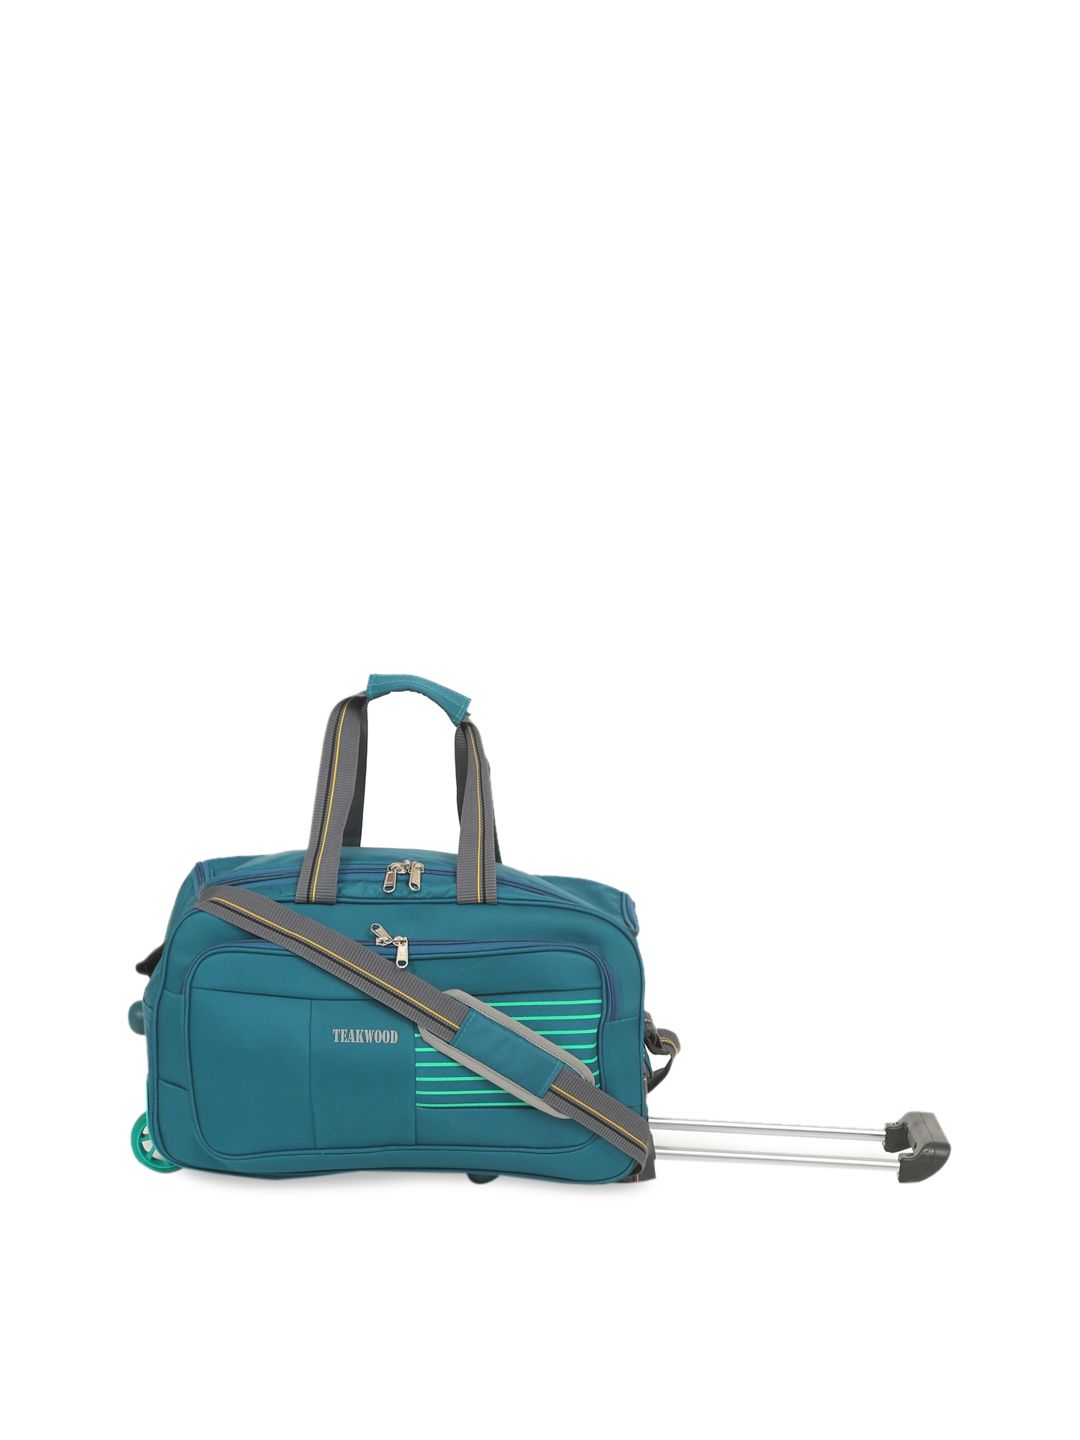 Teakwood Leathers Teal Solid Soft Sided Cabin Trolley Bag Price in India